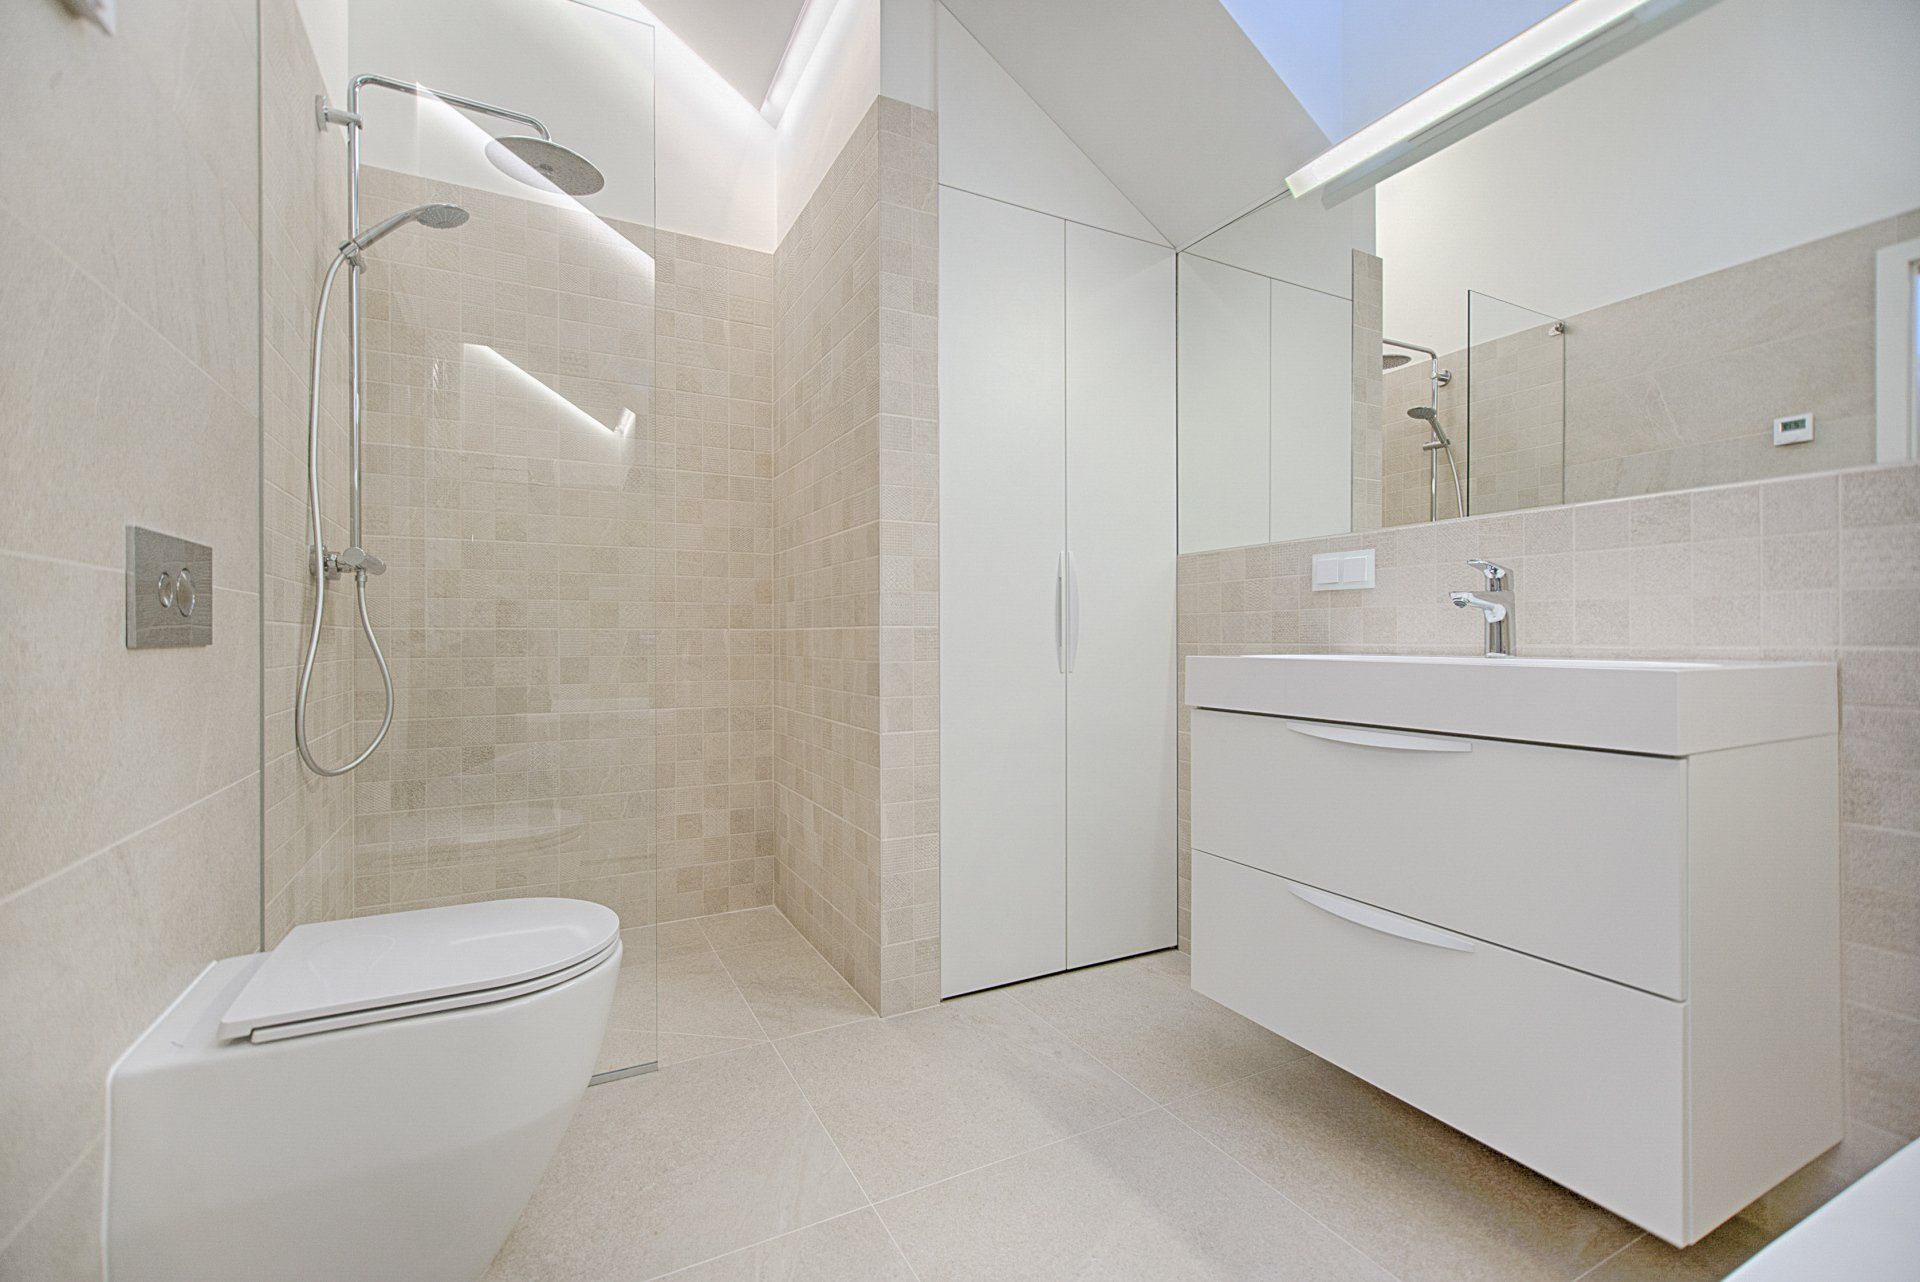 A picture of an new ivory bathroom suite installed by Plumbers Sheffield